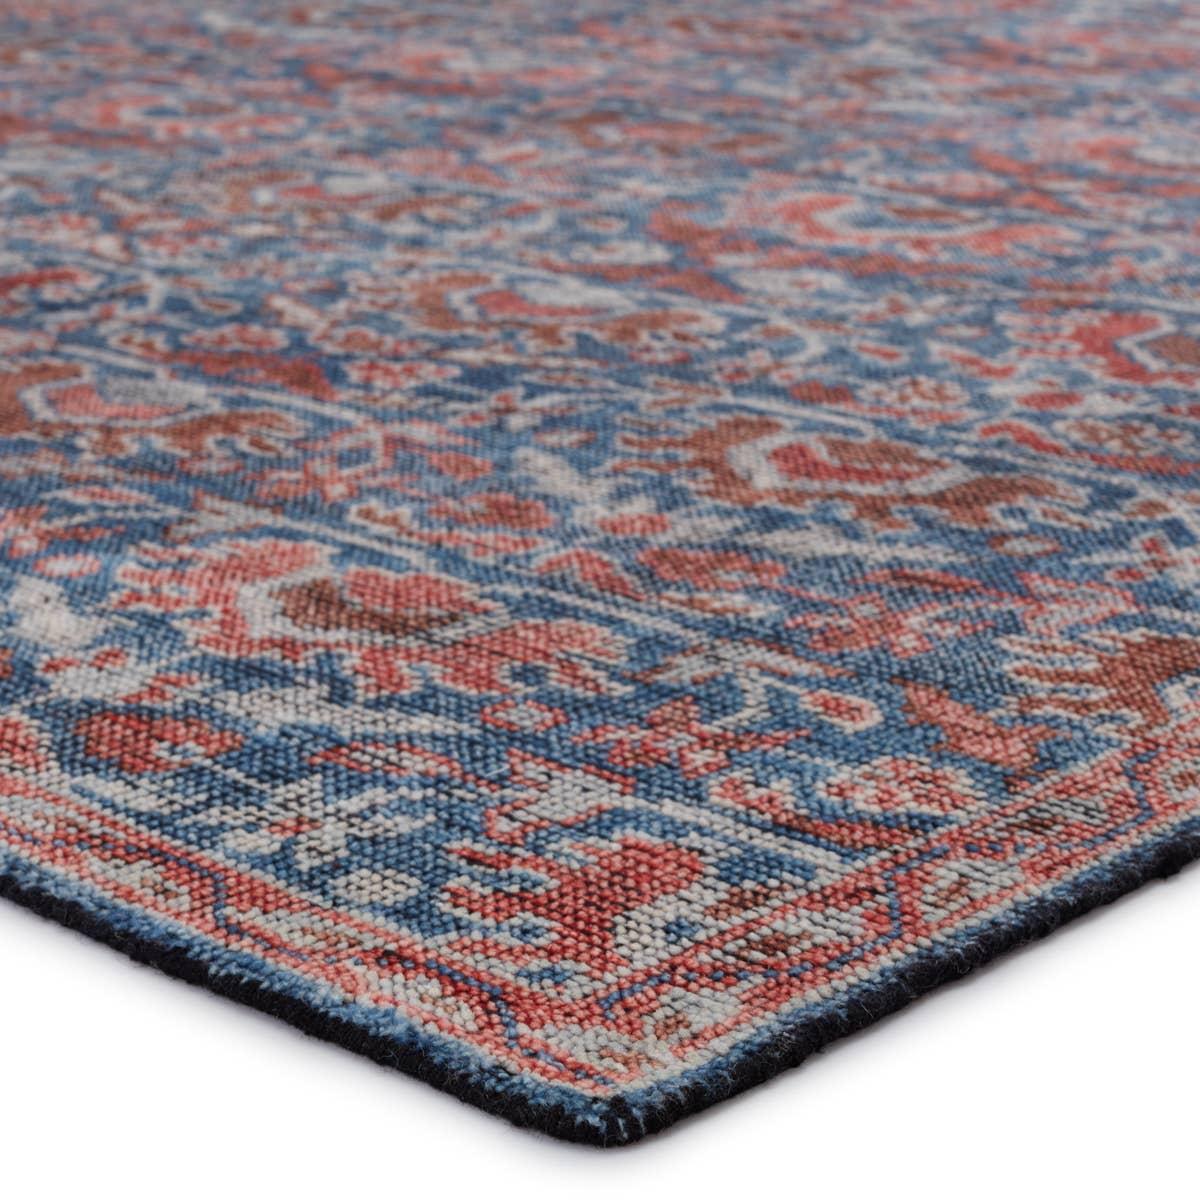 The Rhapsody Venetia features heirloom-quality designs of stunningly abrashed Old World patterns. The Venetia area rug showcases a subtly distressed floral medallion motif in rich, vibrant hues of red, blue, blush, and ivory. This durable wool handknot anchors living spaces with a fresh take on vintage style.Hand Knotted Amethyst Home provides interior design, new home construction design consulting, vintage area rugs, and lighting in the Portland metro area.